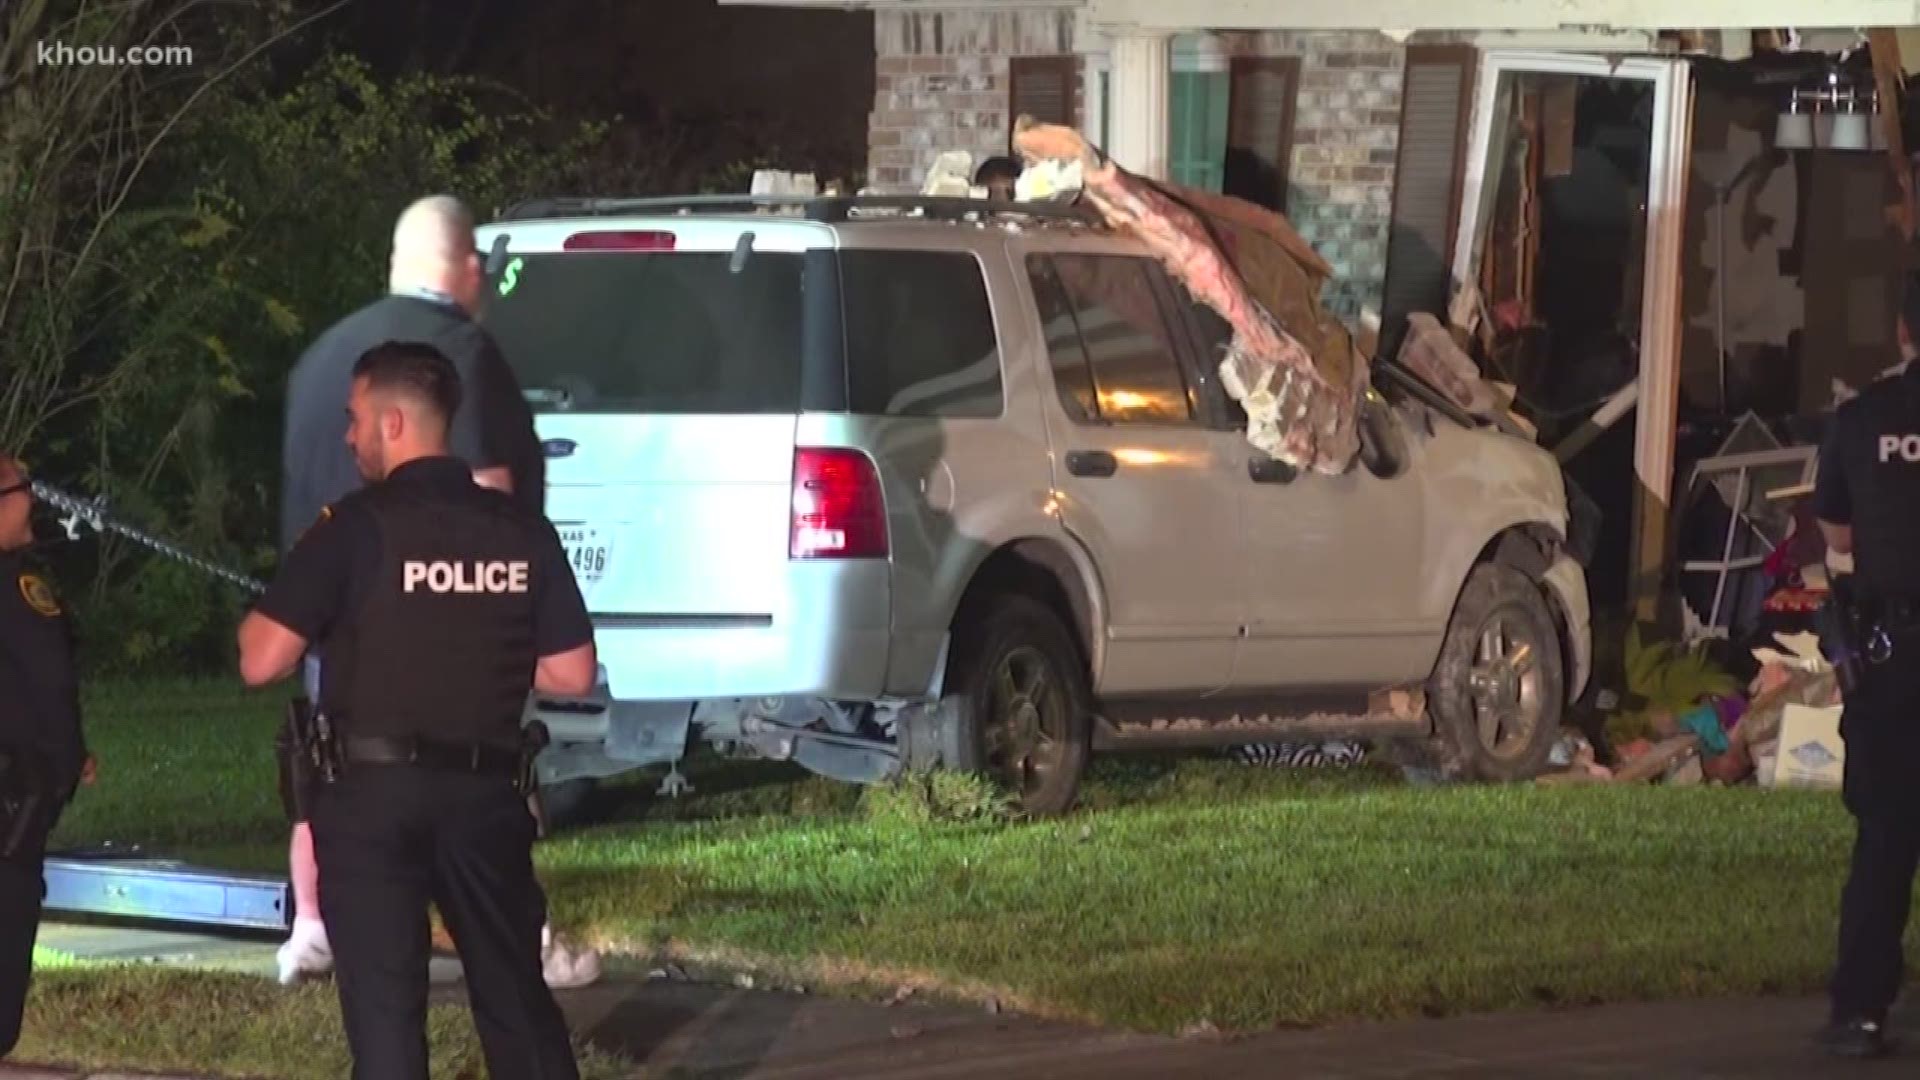 A teenager who took his parents’ SUV out for a late-night drive is in custody after crashing it into a home during a pursuit, police said early Tuesday.